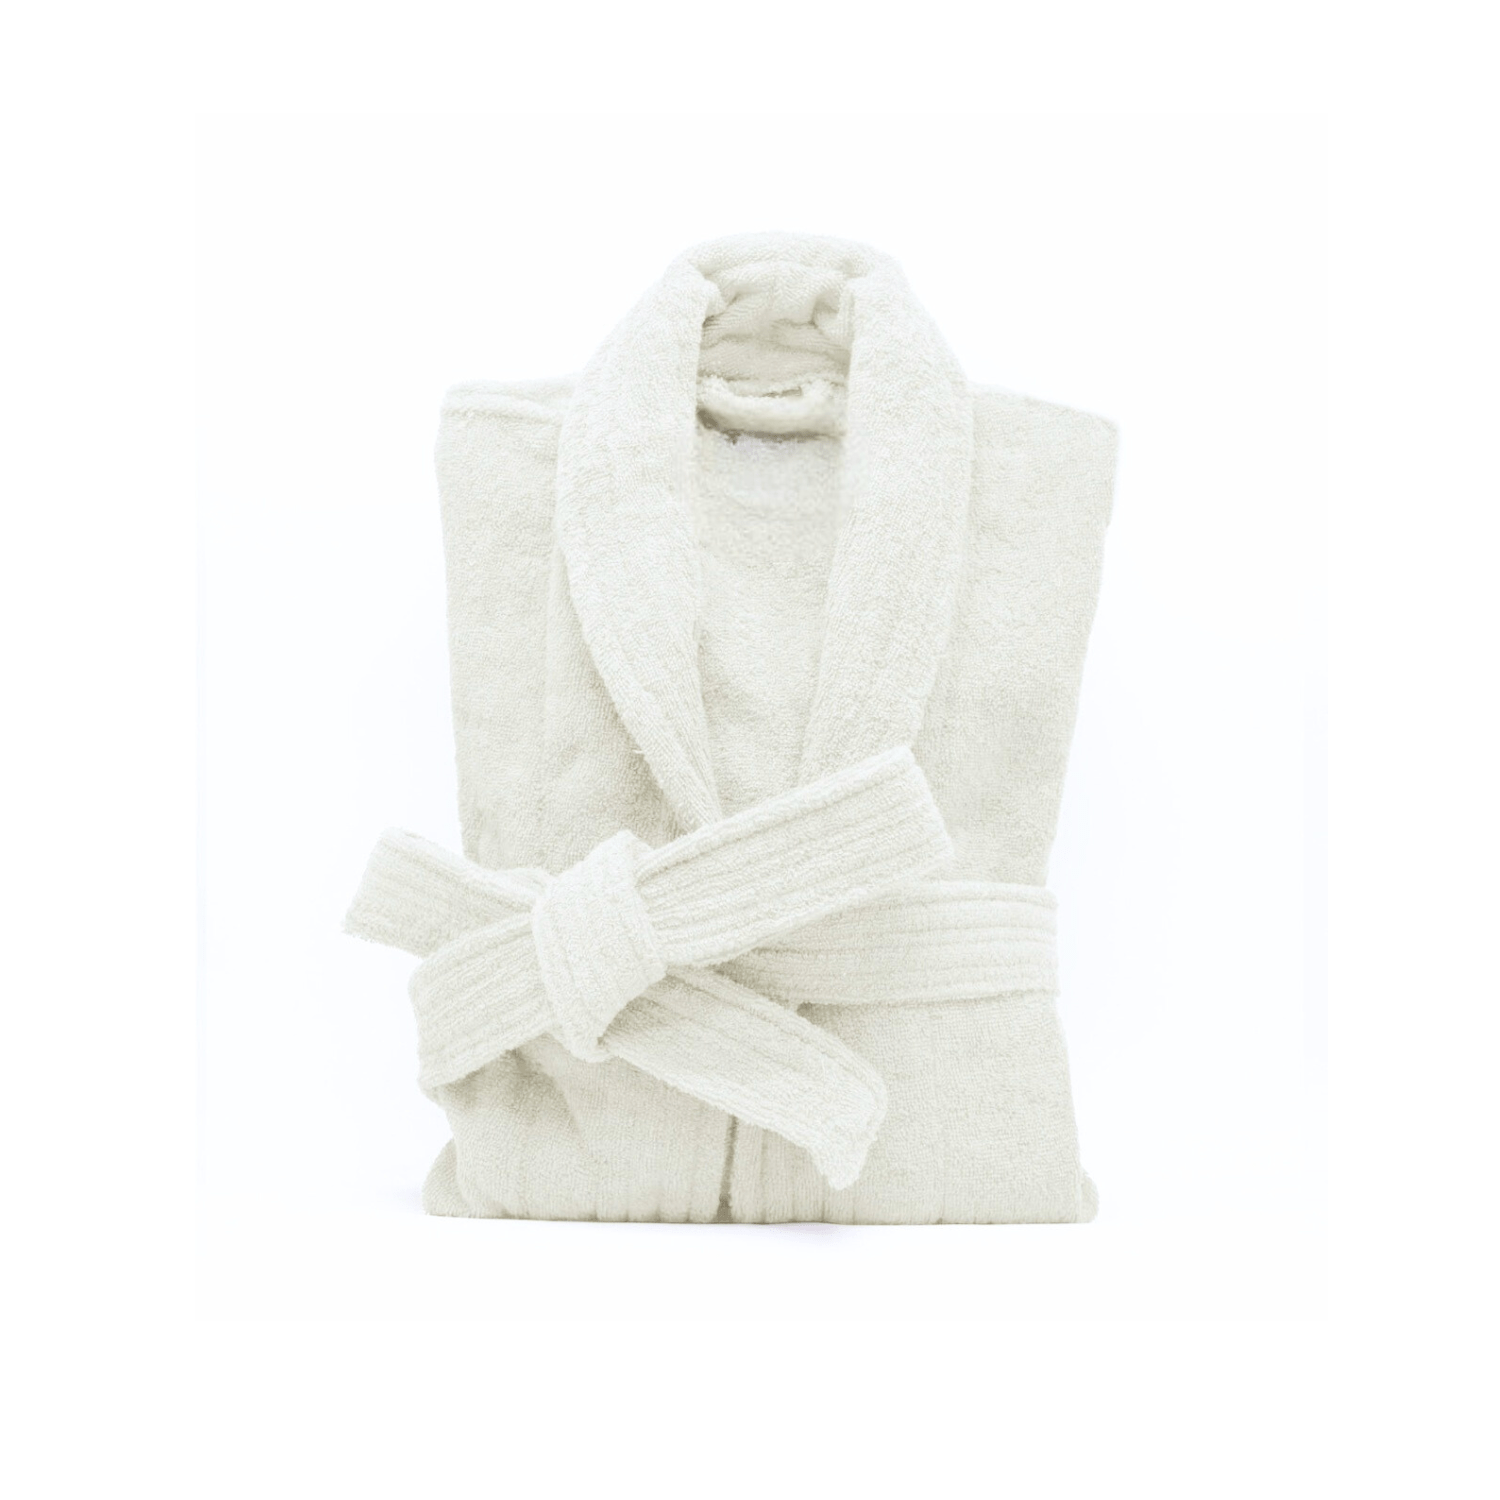 Bedlam white cotton bathrobe towel gown for him and her